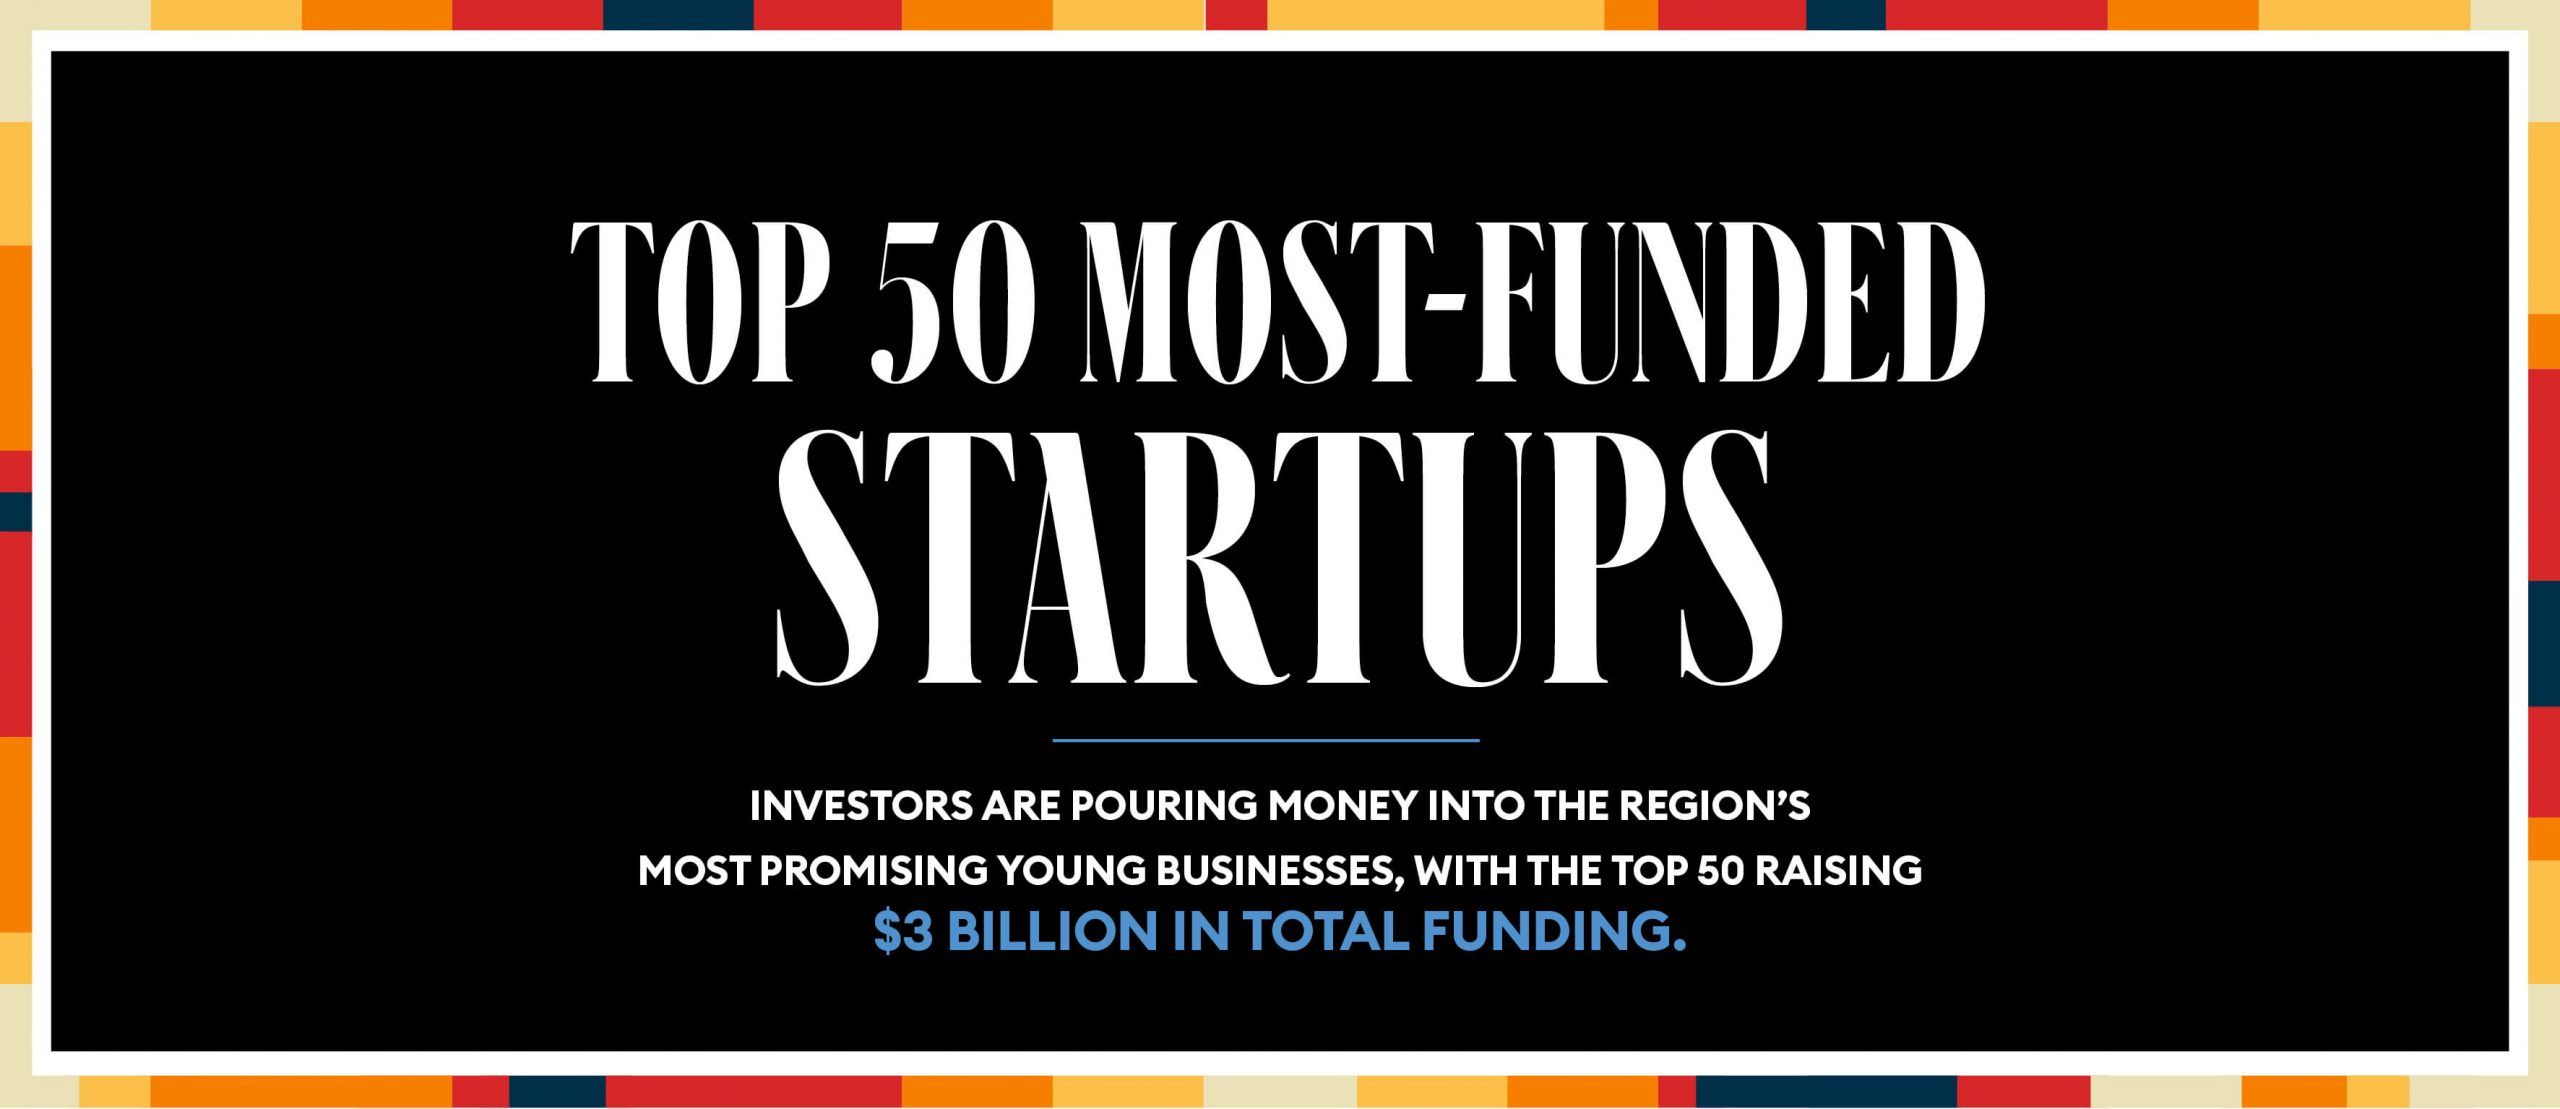 Top 50 most-funded startups